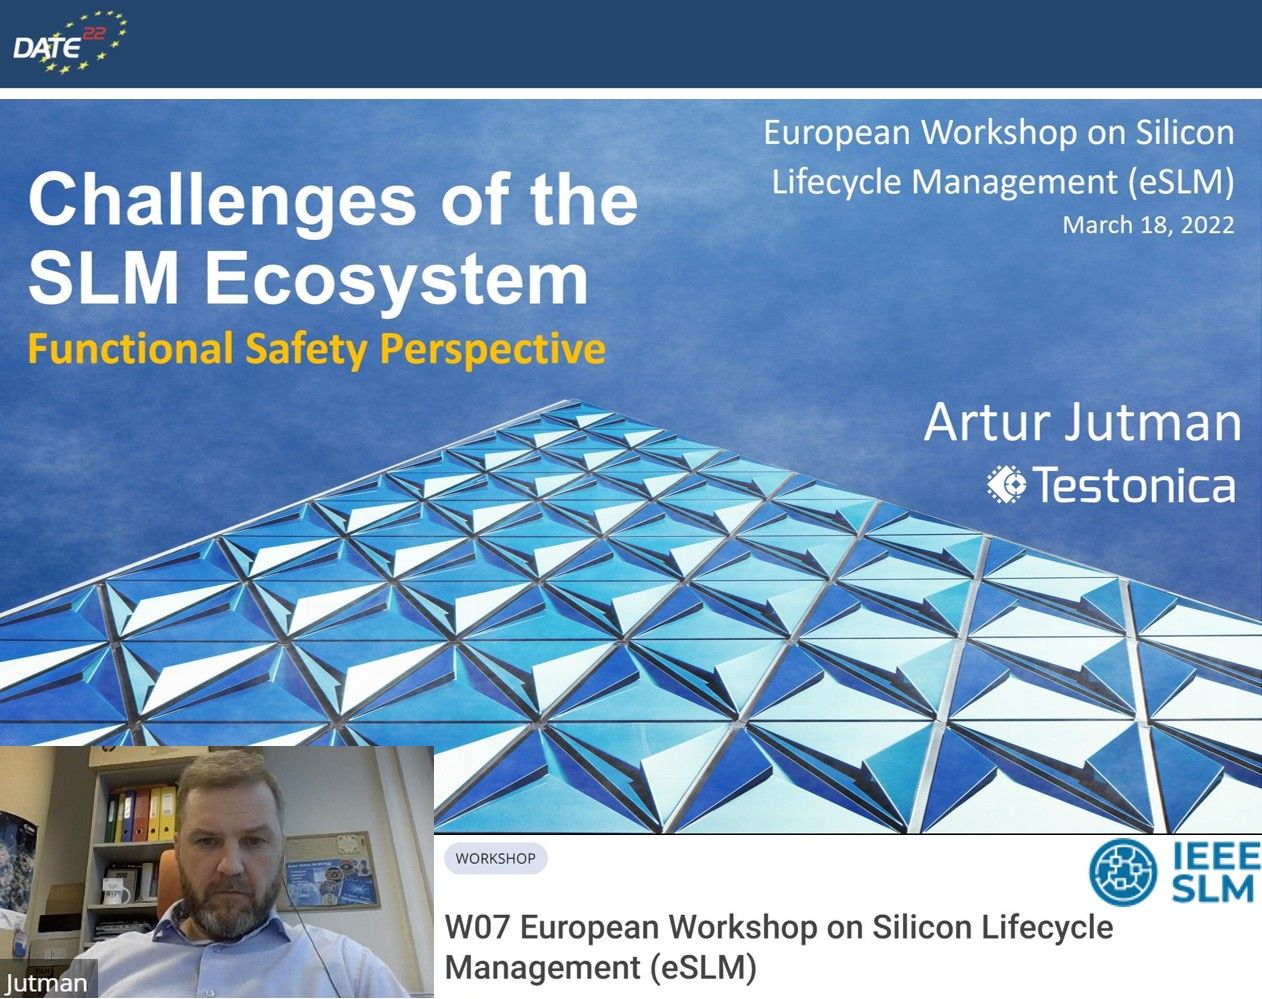 Testonica's presentation at Workshop on European Silicon Lifecycle Management (eSLM)